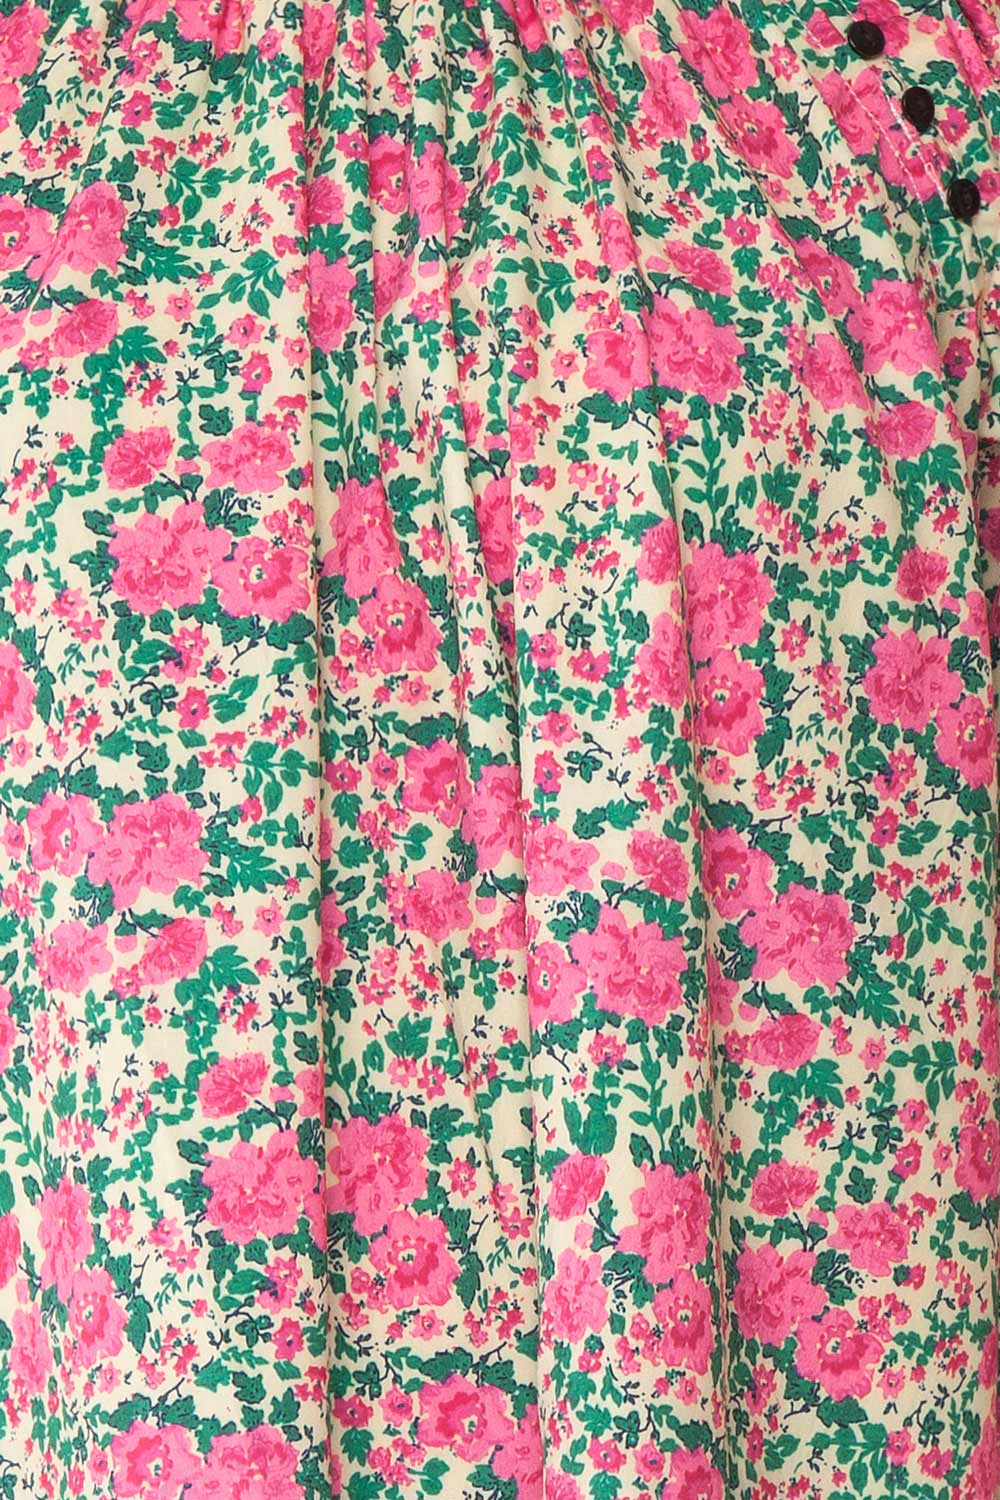 Oxomoco Pink & Green Floral Short Dress | Boutique 1861 fabric